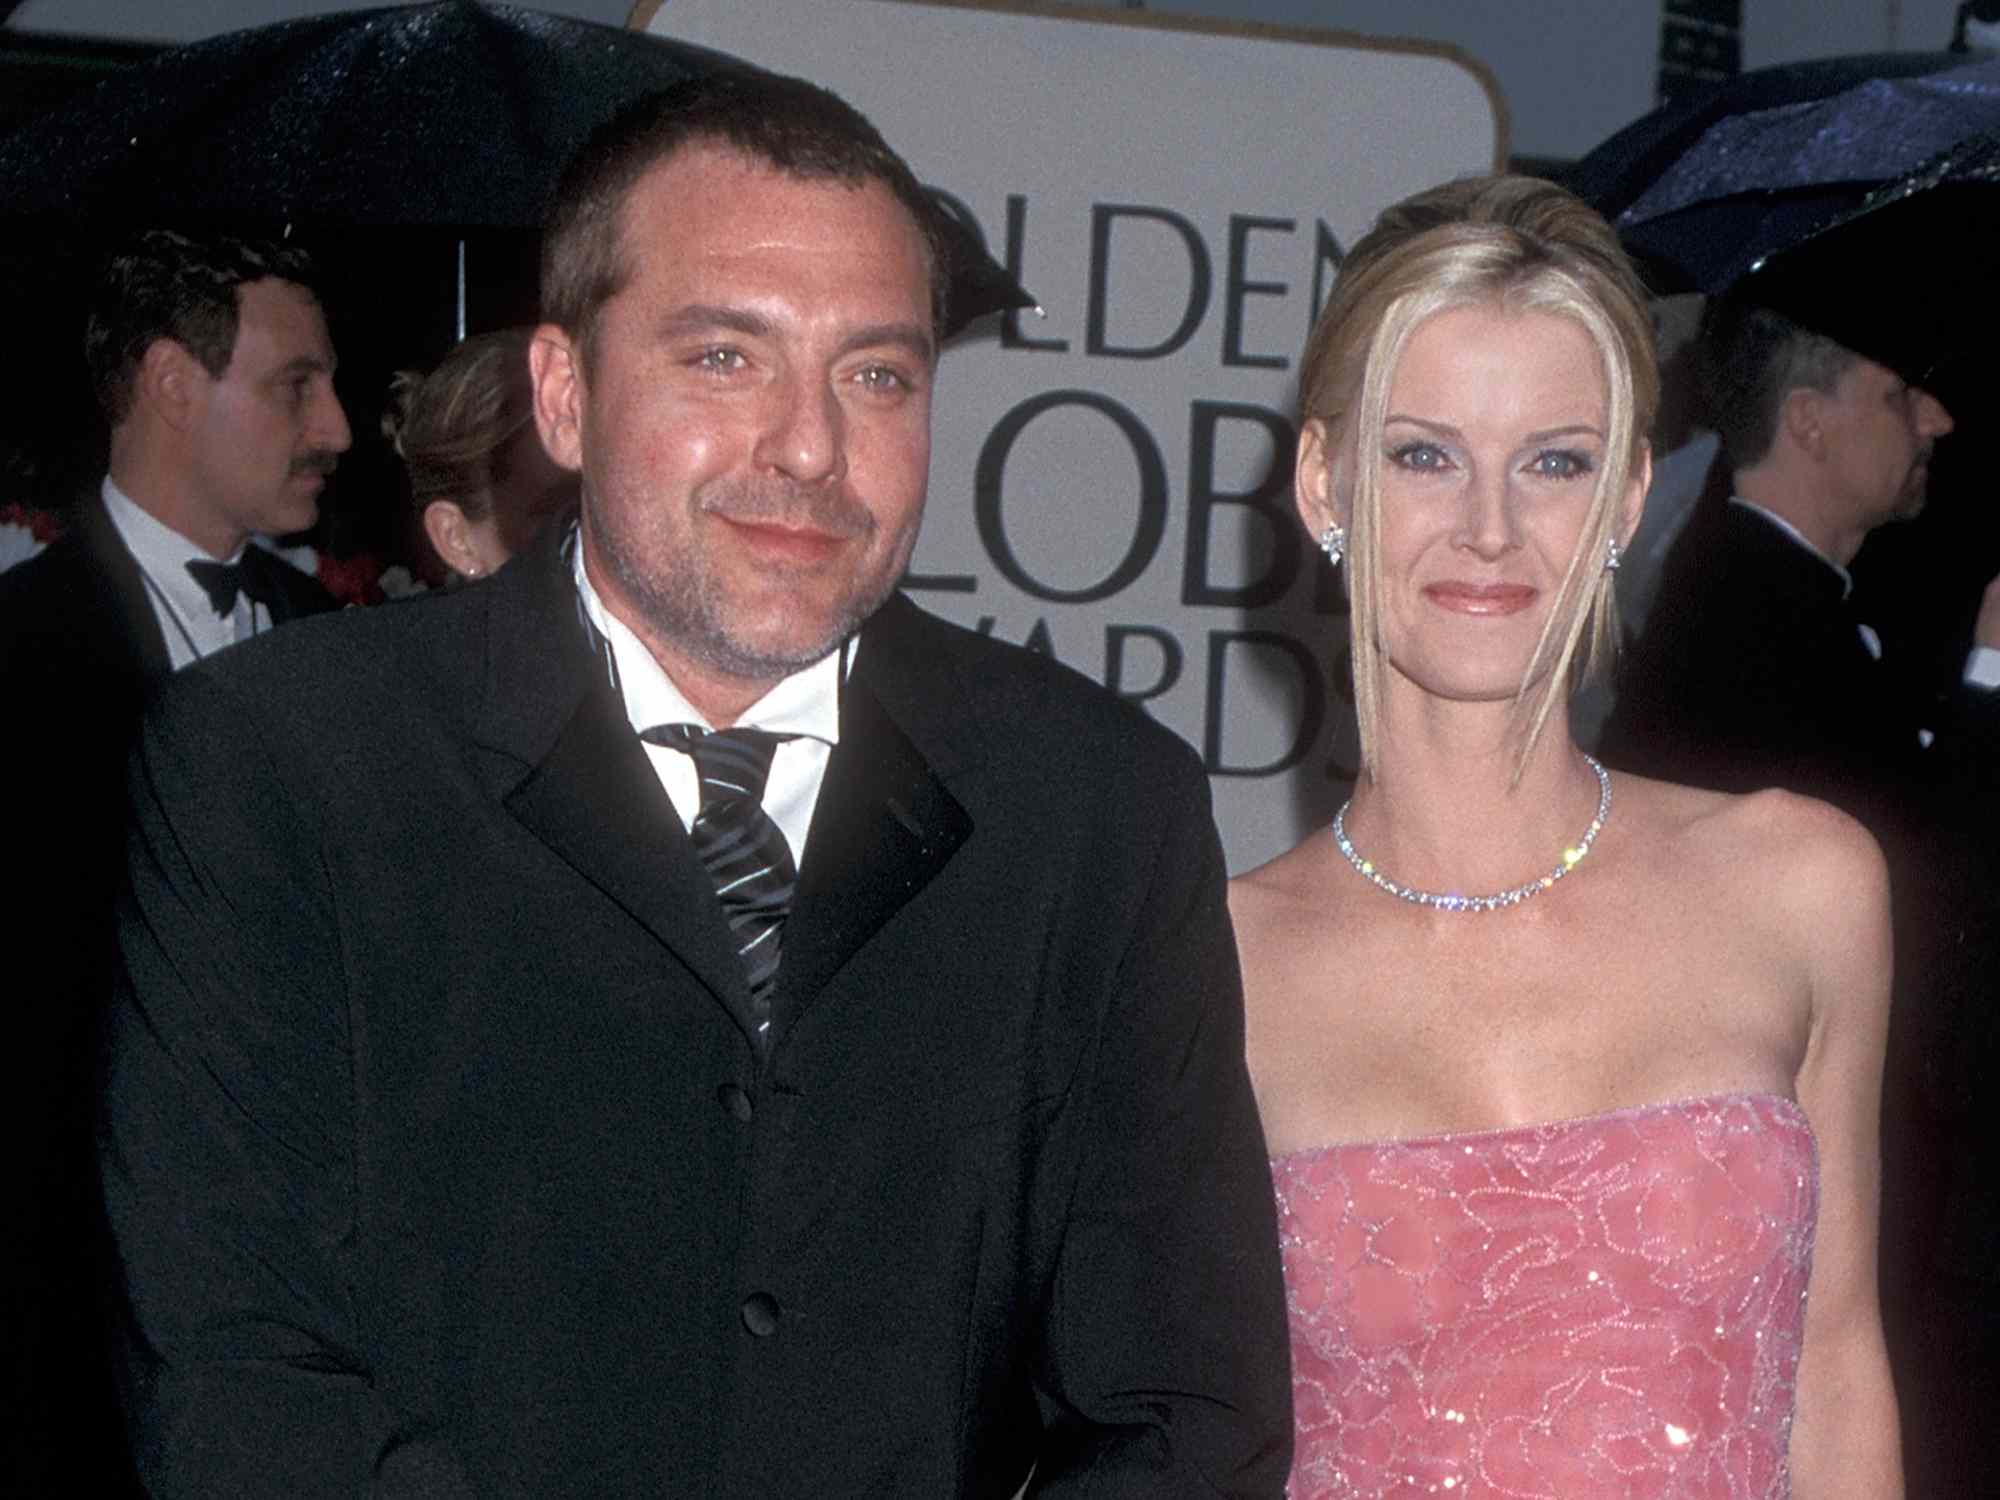 Tom Sizemore and wife actress Maeve Quinlan attend the 57th Annual Golden Globe Awards on January 23, 2000 at the Beverly Hilton Hotel in Beverly Hills, California